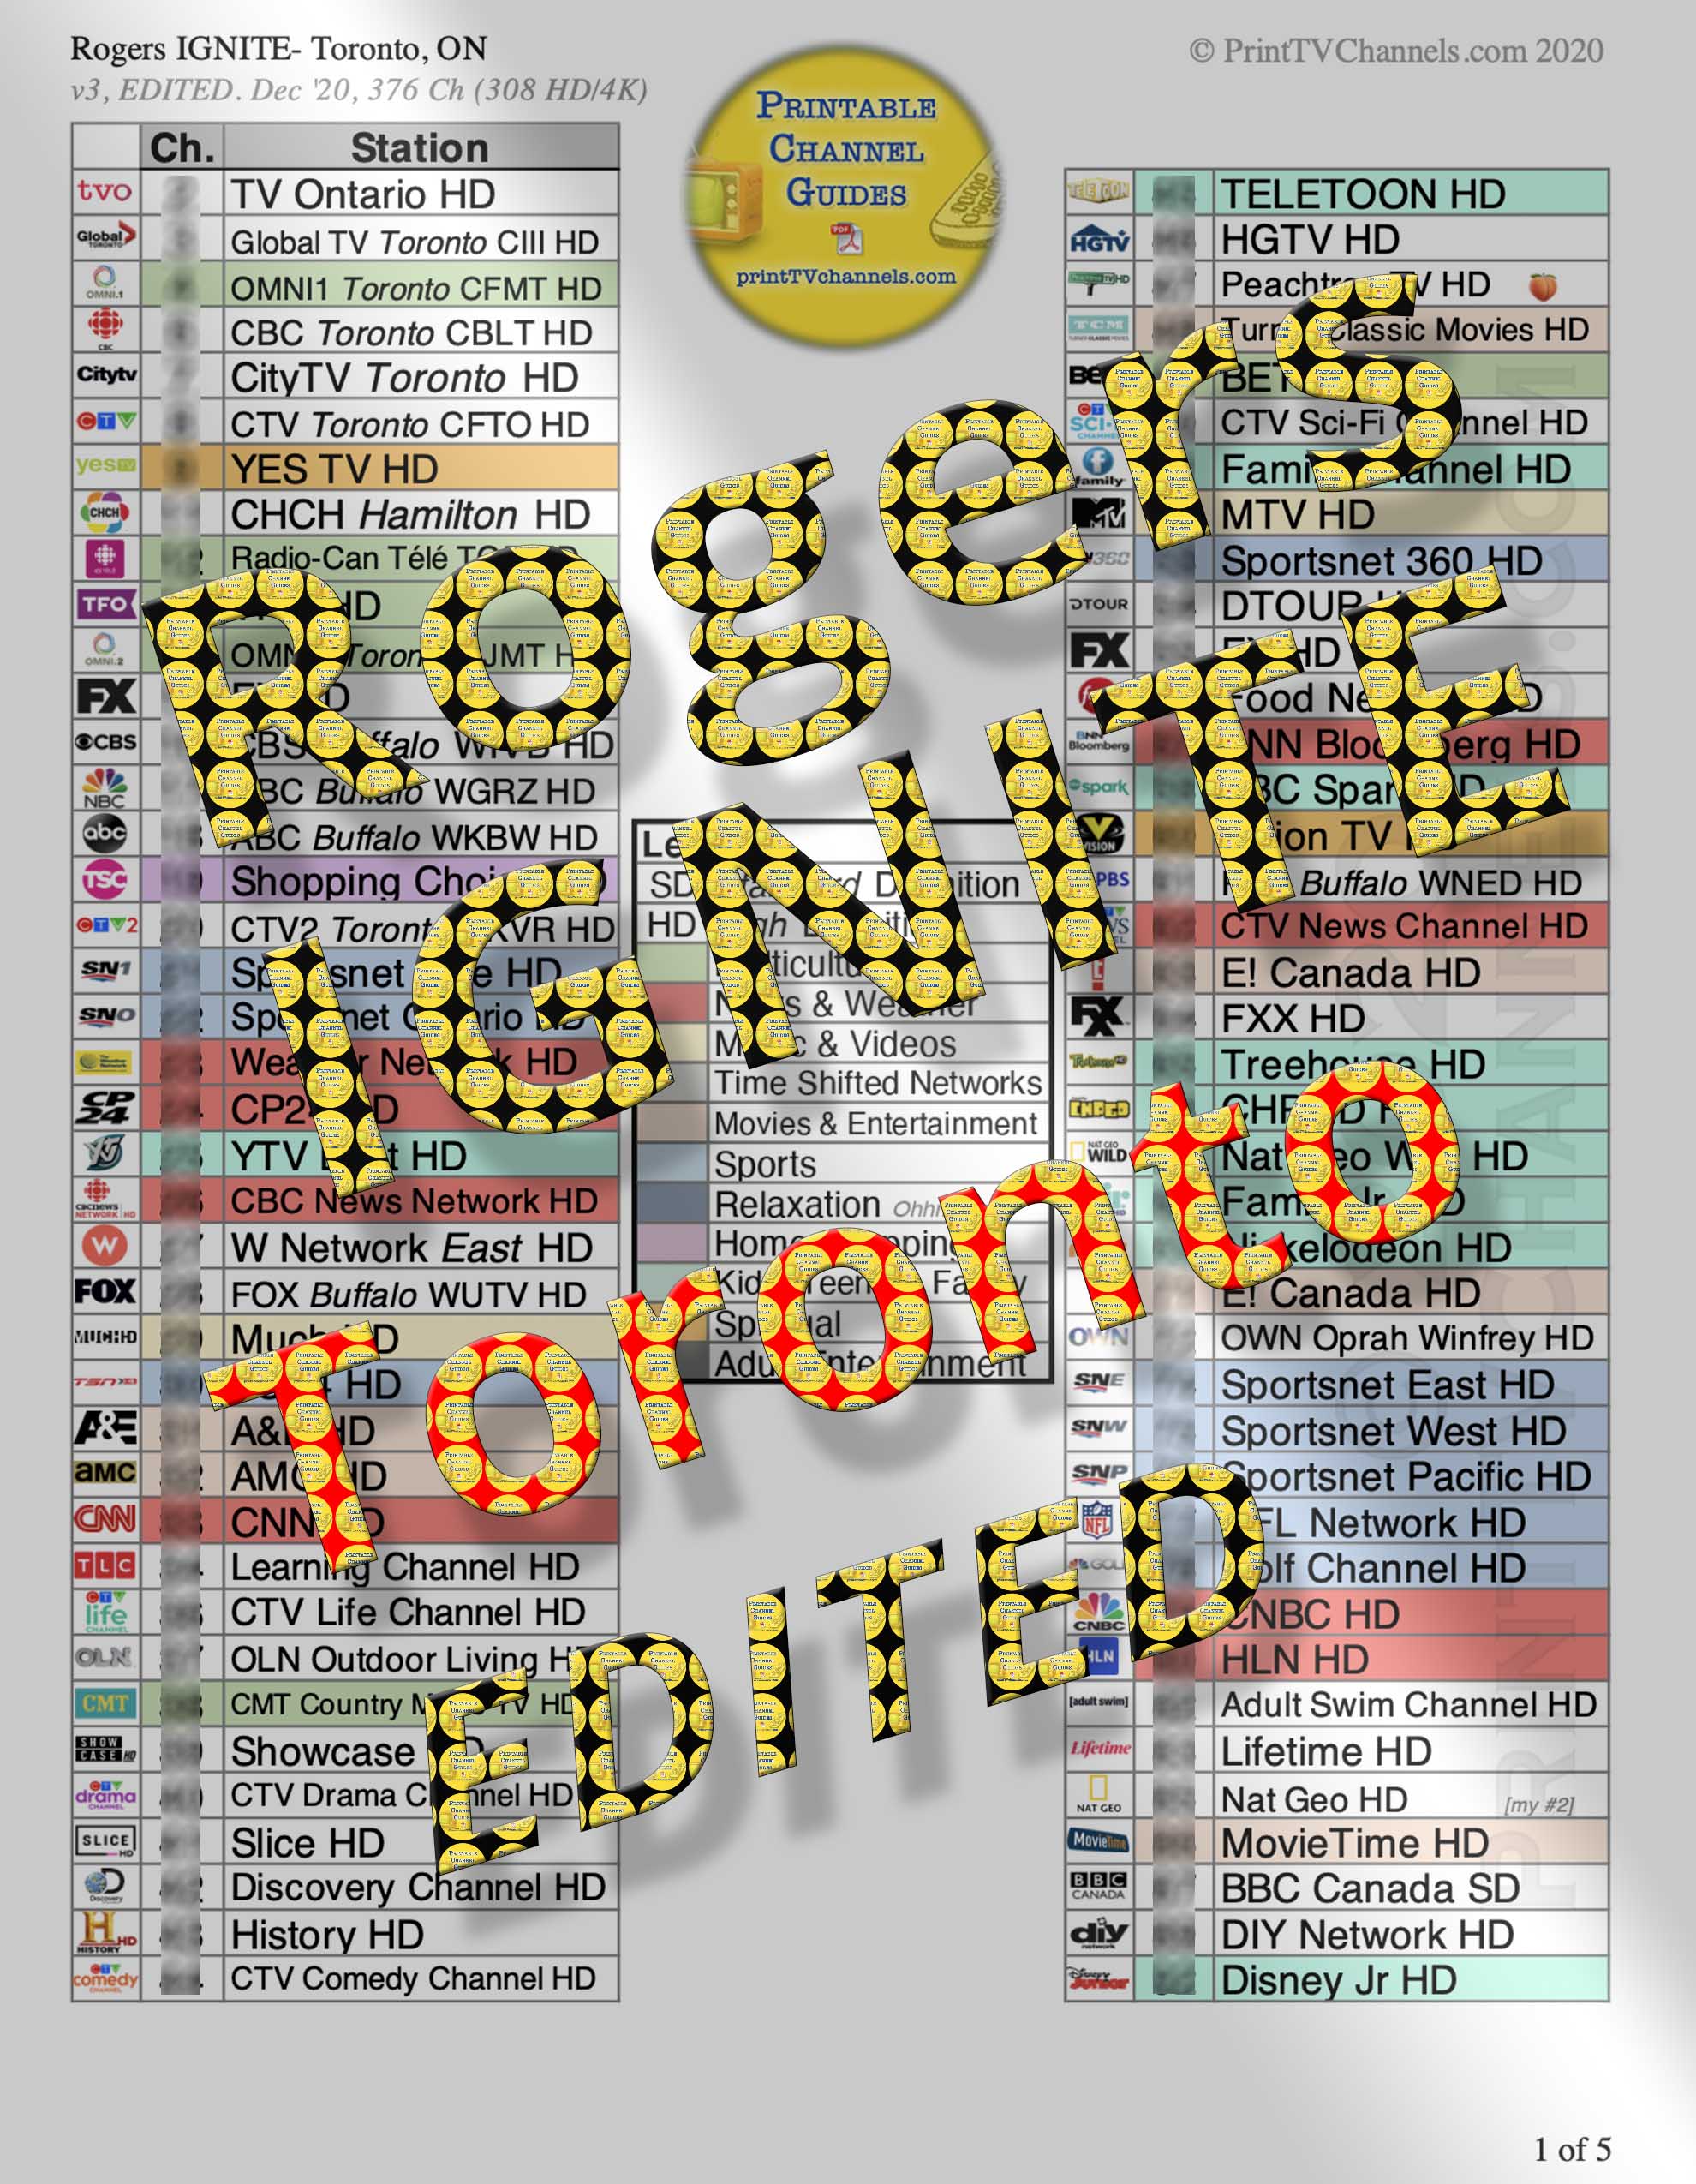 Rogers IGNITE TV Channel Guide Toronto Edited PREVIEW 